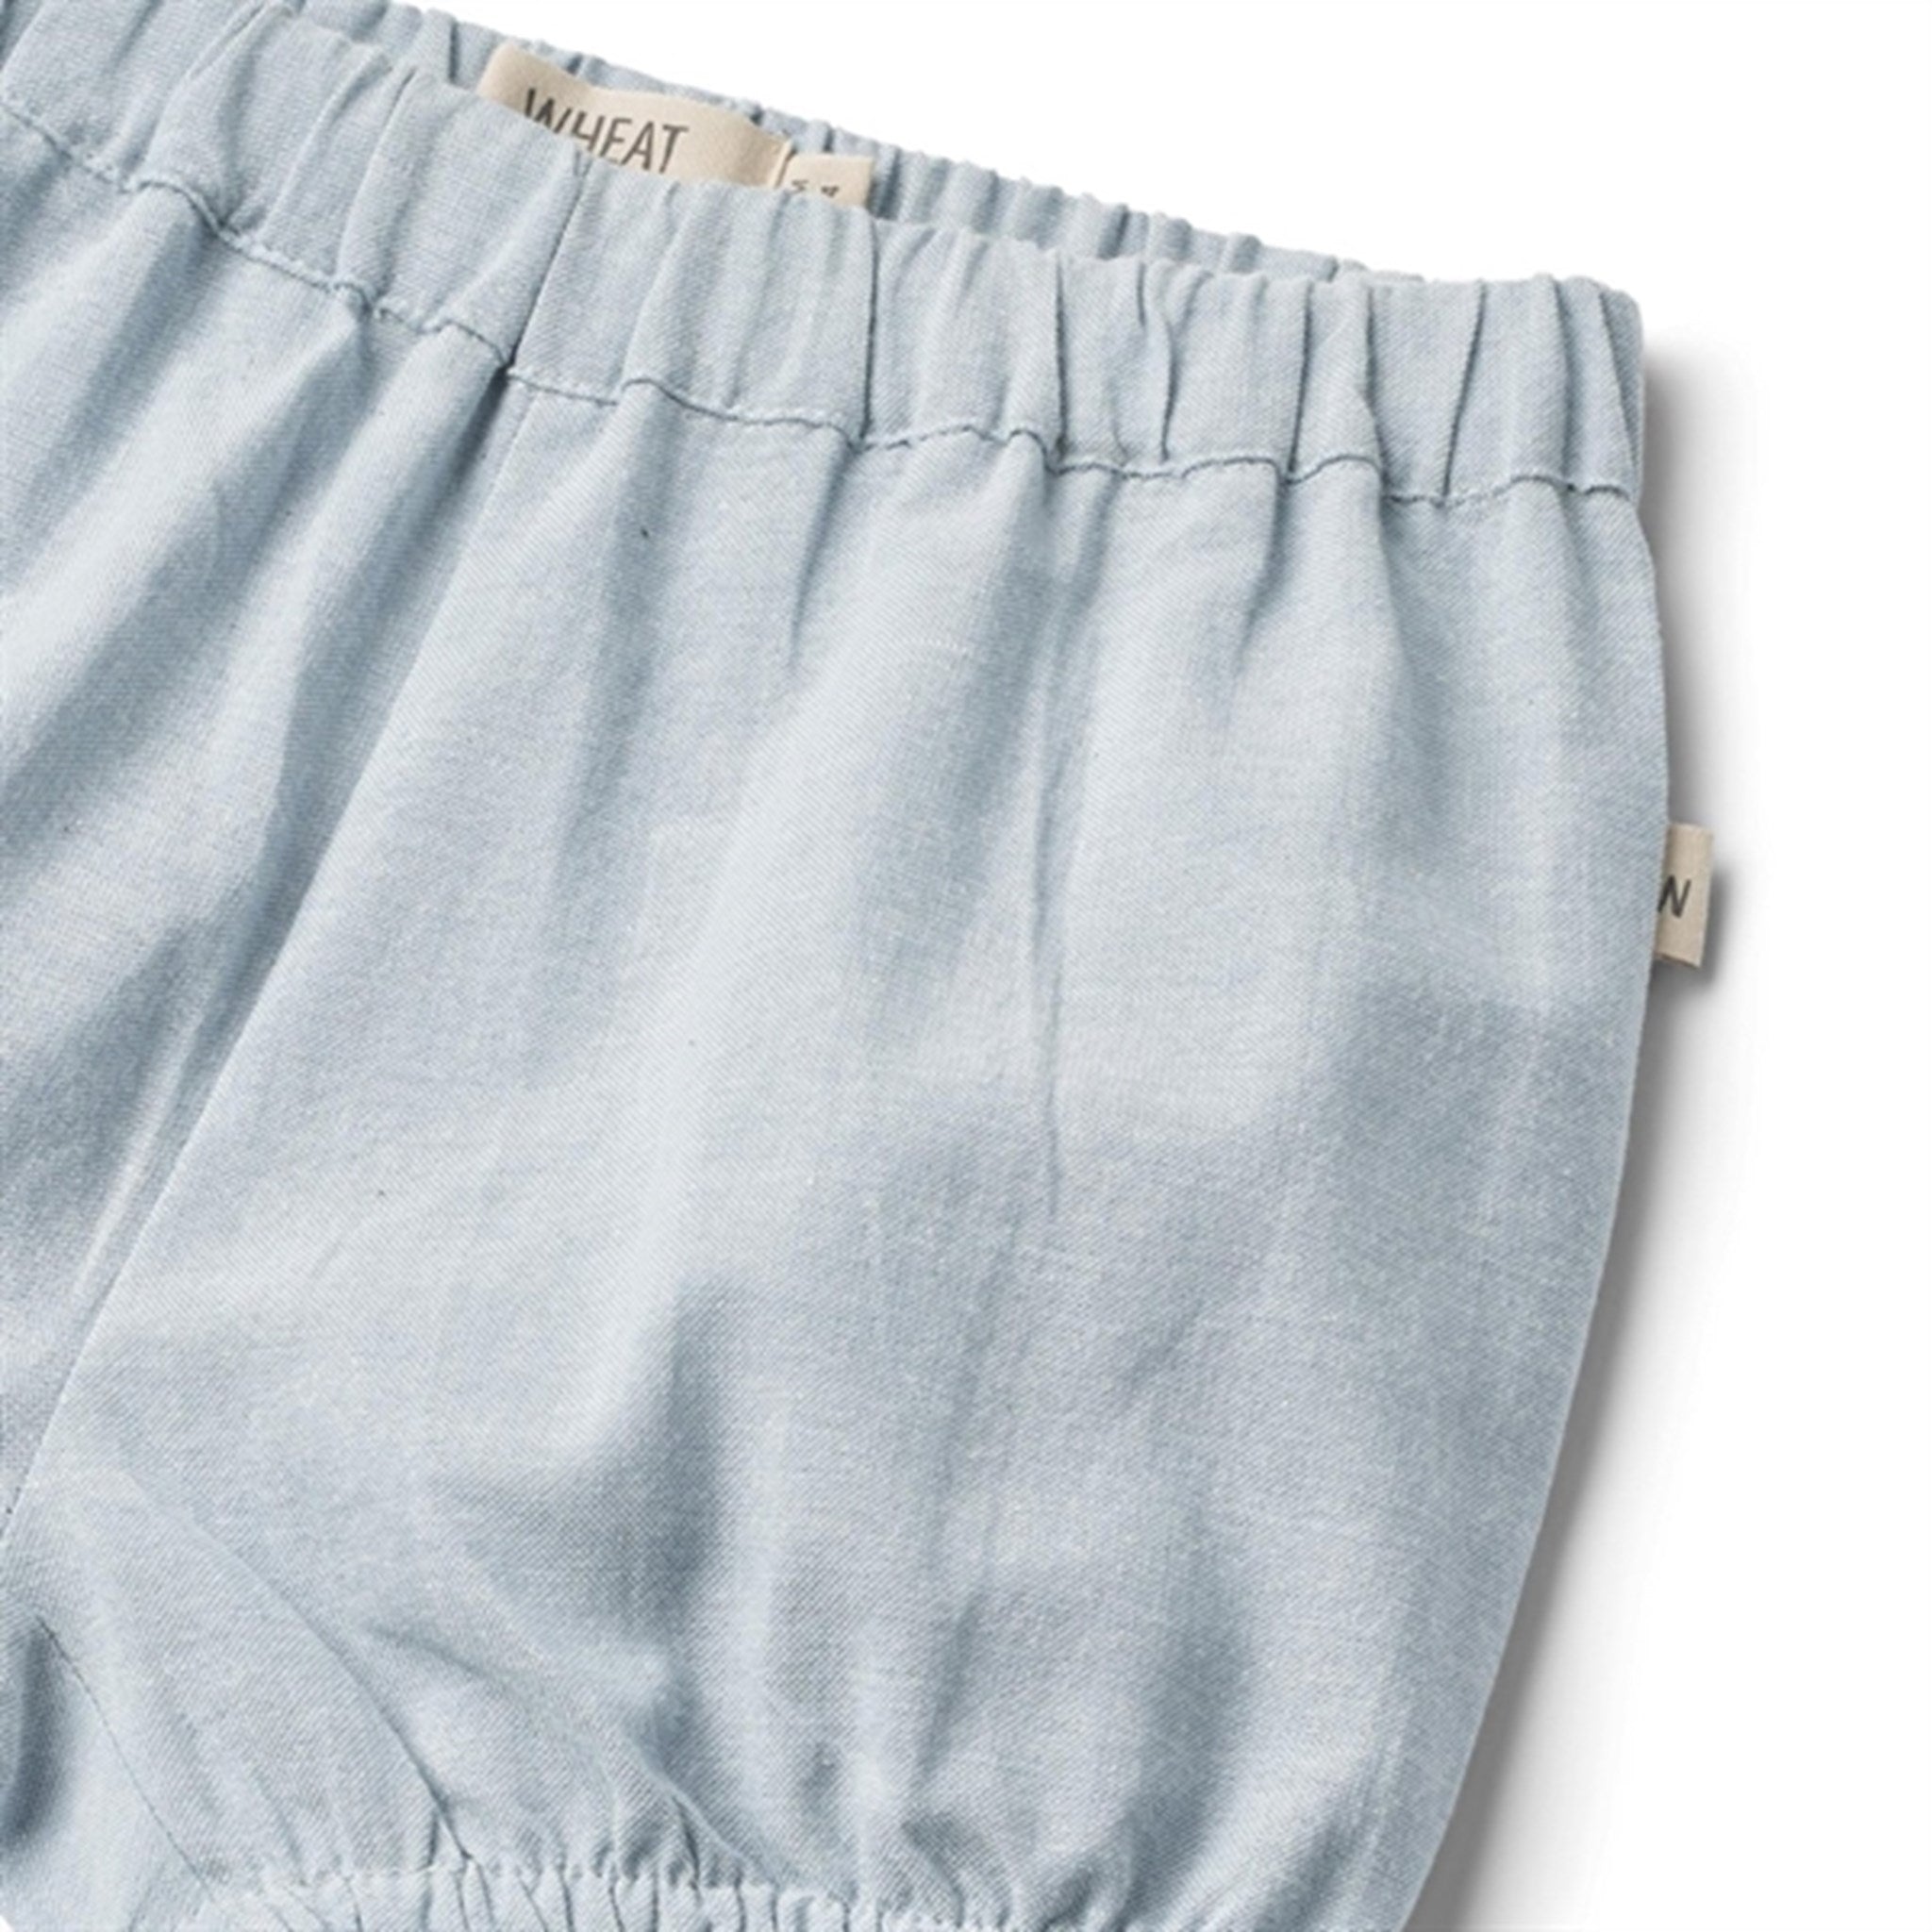 Wheat Blue Waves Shorts Olly 3